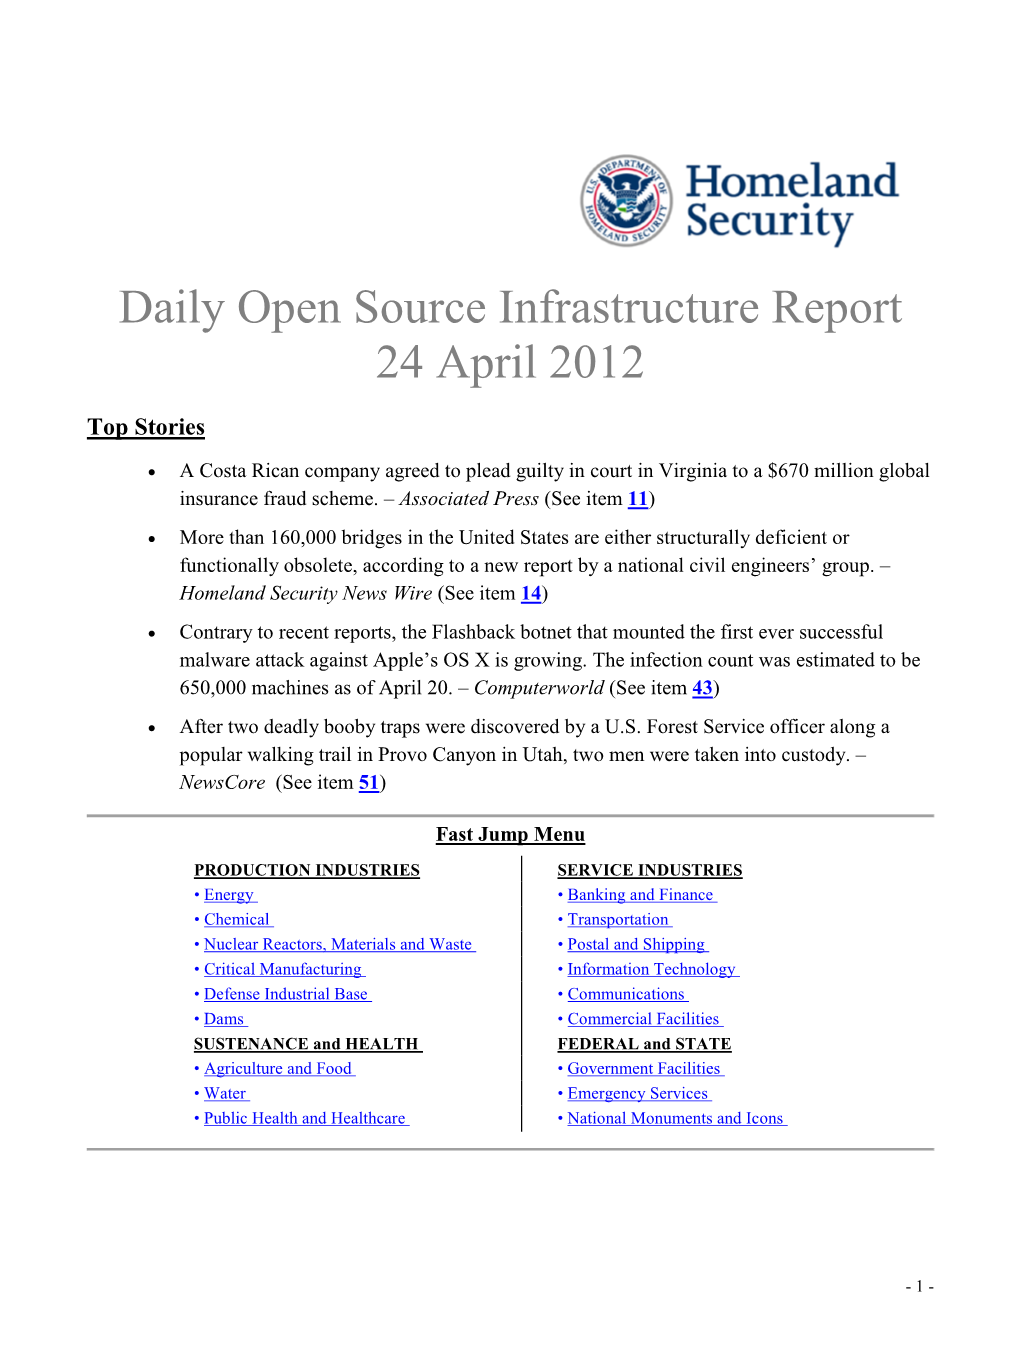 Department of Homeland Security Daily Open Source Infrastructure